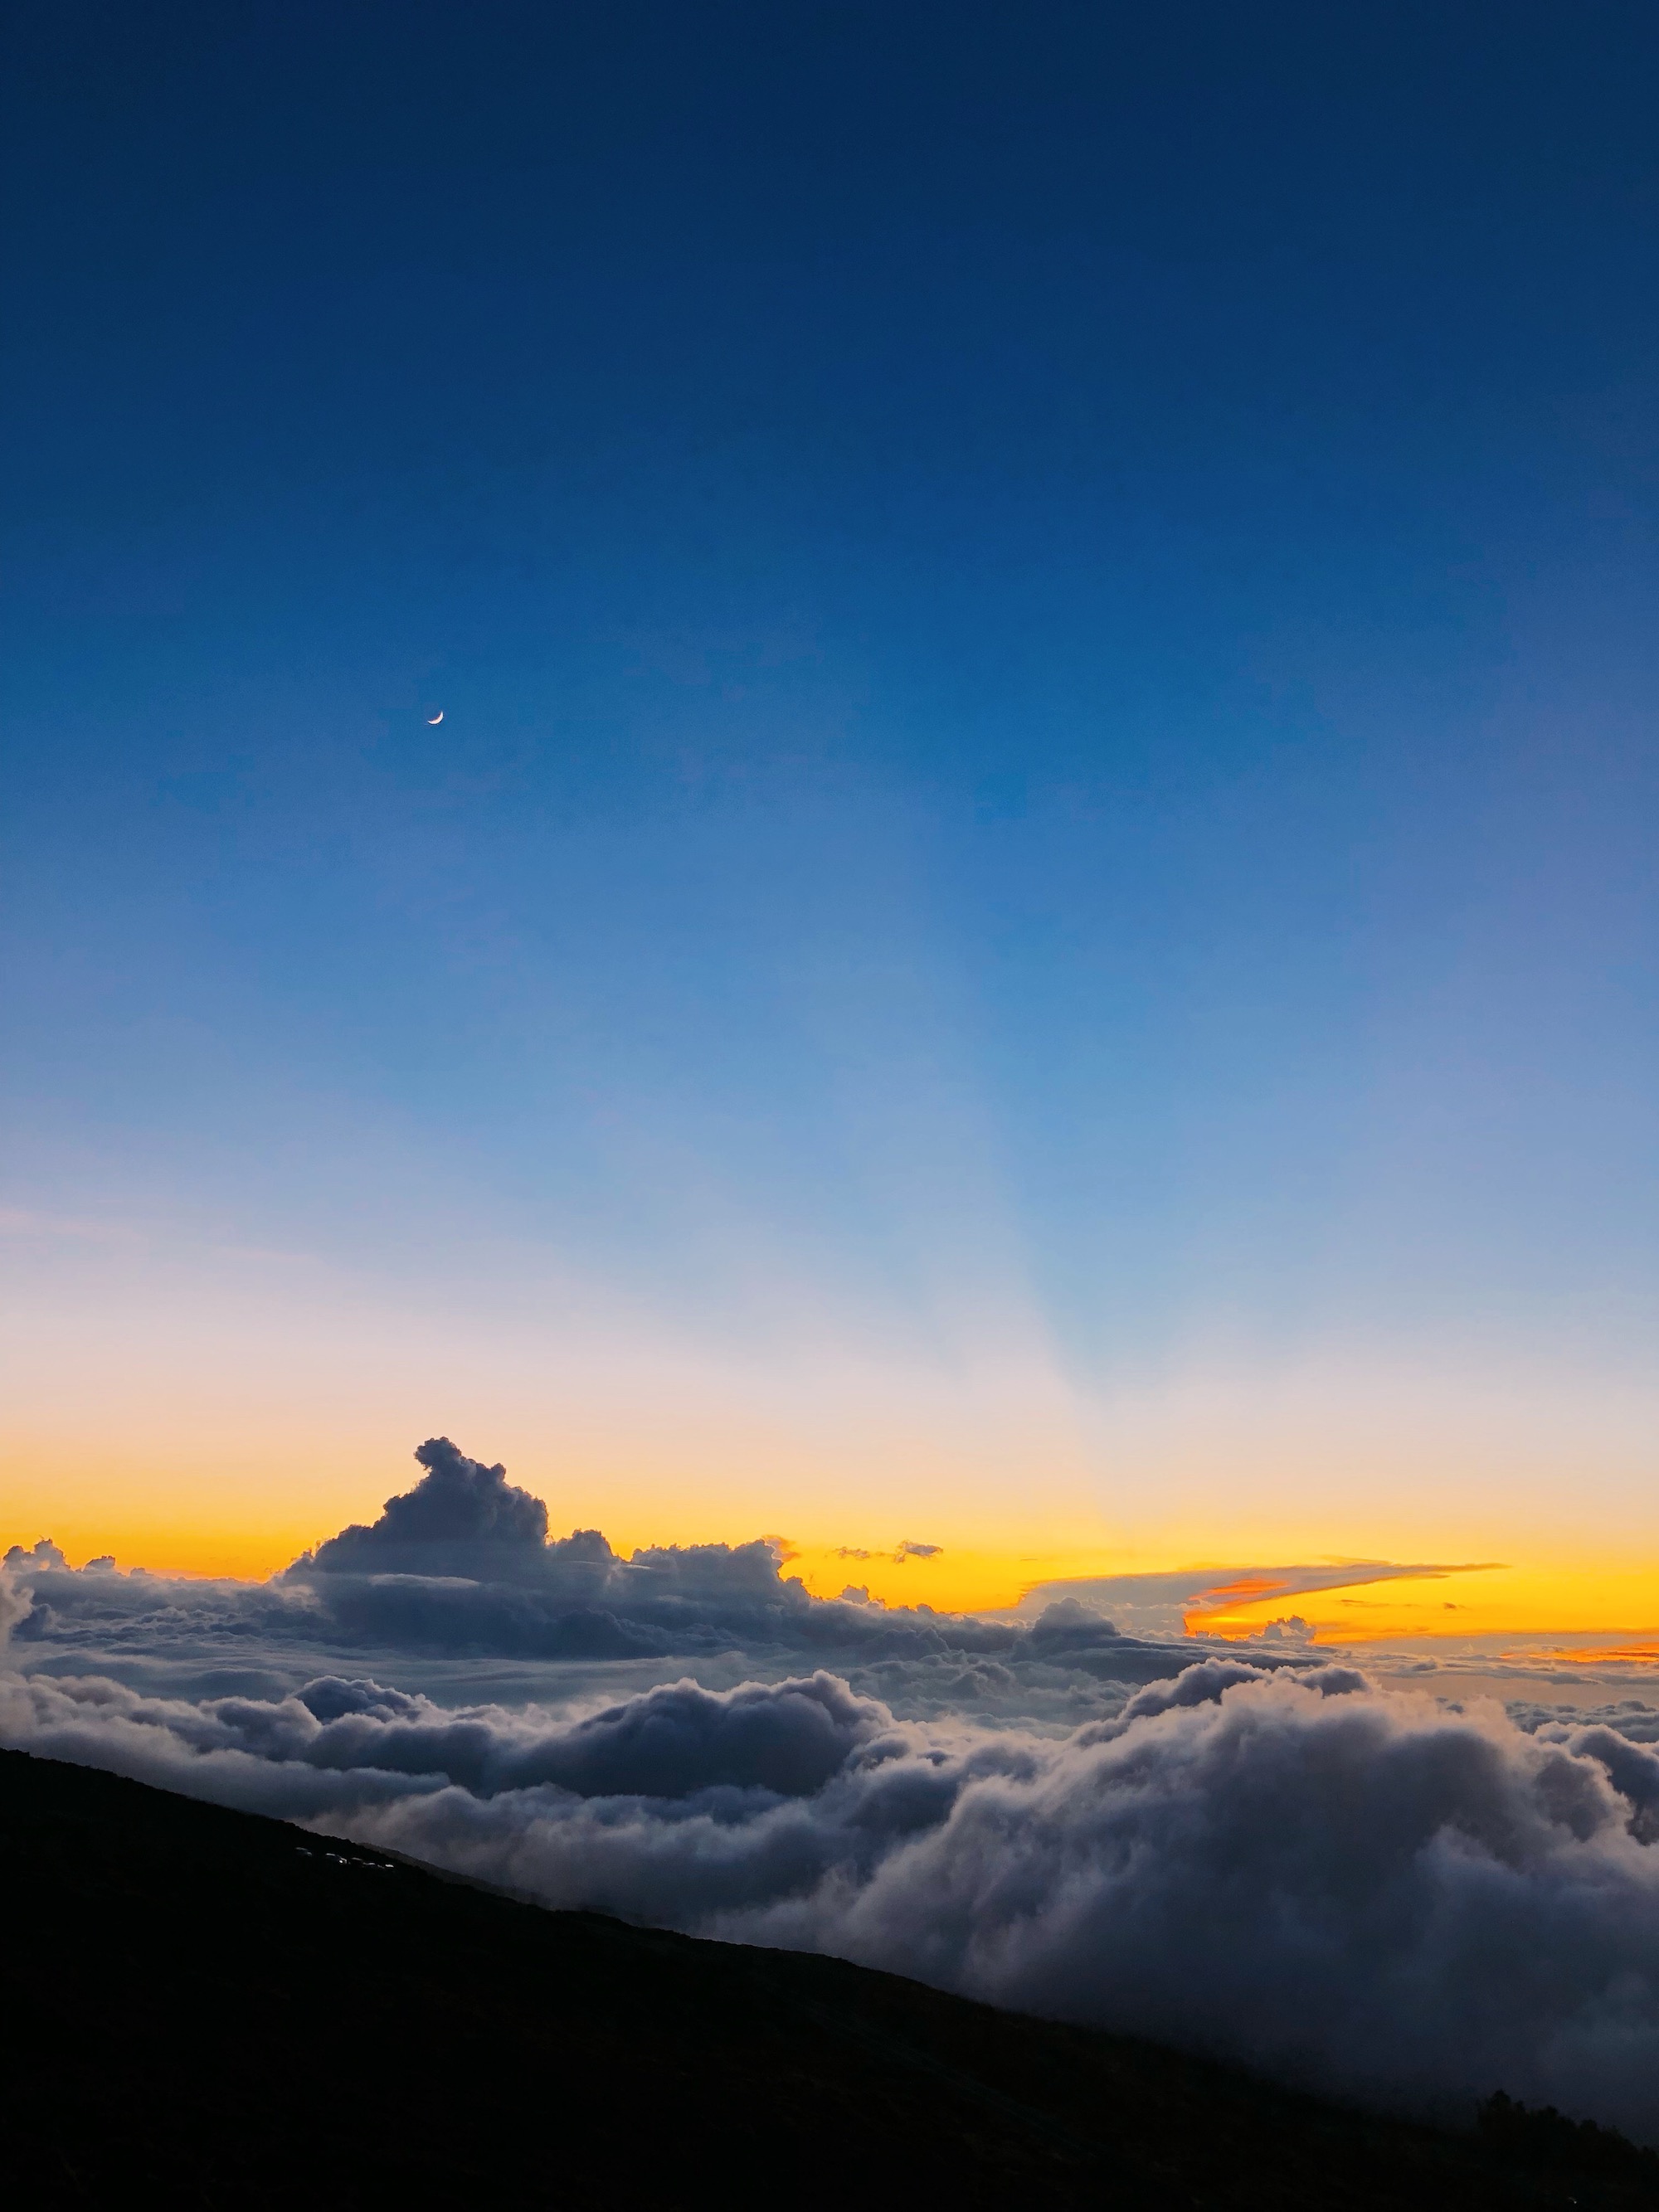 Things to do in Maui for Couples - Haleakala Crater